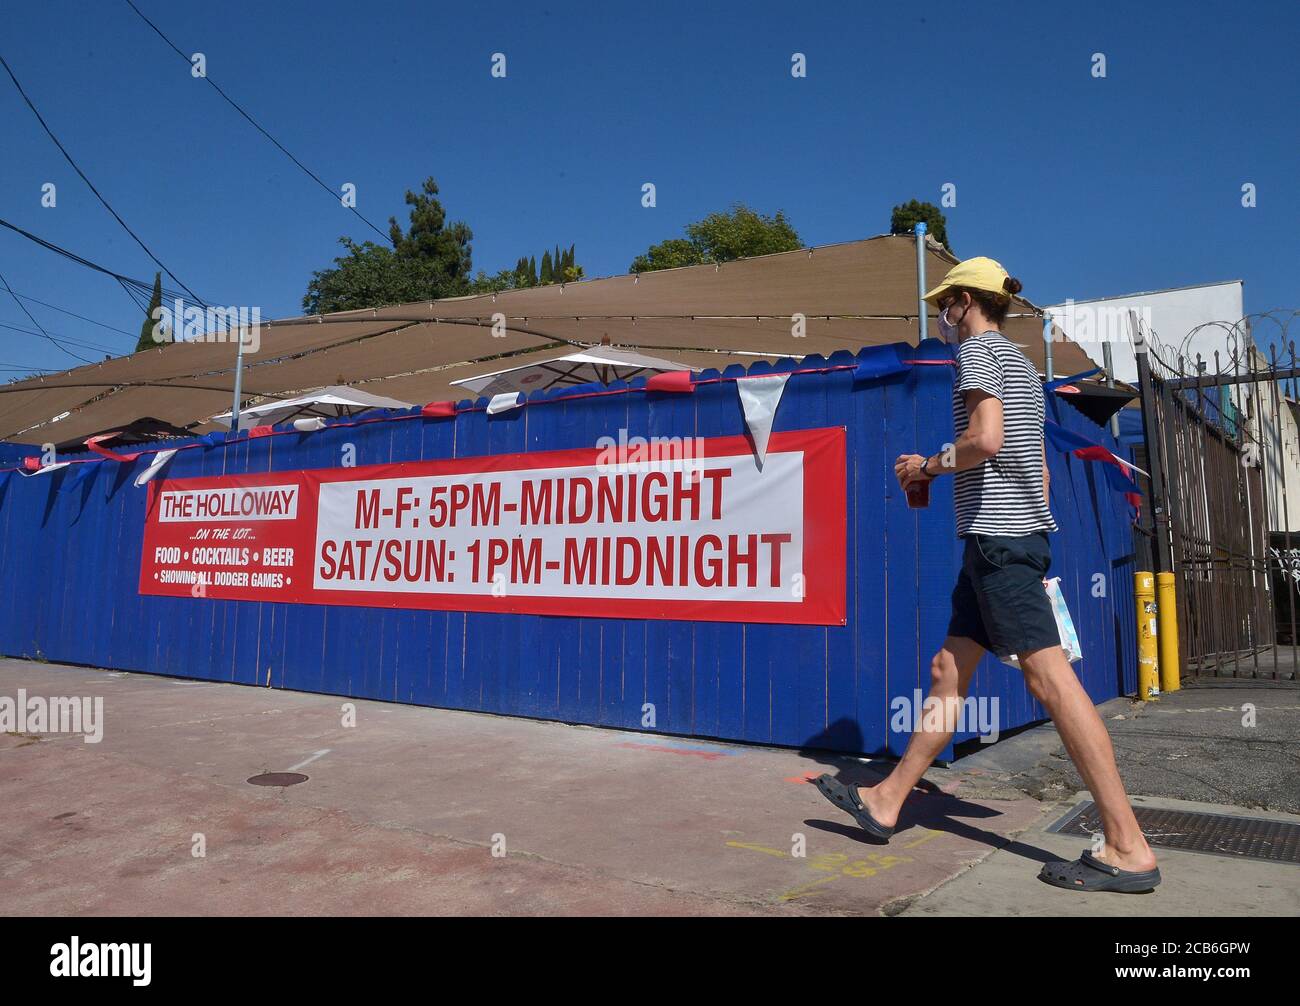 Los Angeles, United States. 10th Aug, 2020. A man walks past a bar informing customers that it will be open during weekends outdoors on their patio after Los Angeles County officials barred indoor ding at restaurants and bars following a spike in COVID-19 cases in the Silver Lake area of Los Angeles on Monday, August 10, 2020. 'Simply put, closing the bars worked,' said Ferrer. Credit: UPI/Alamy Live News Stock Photo